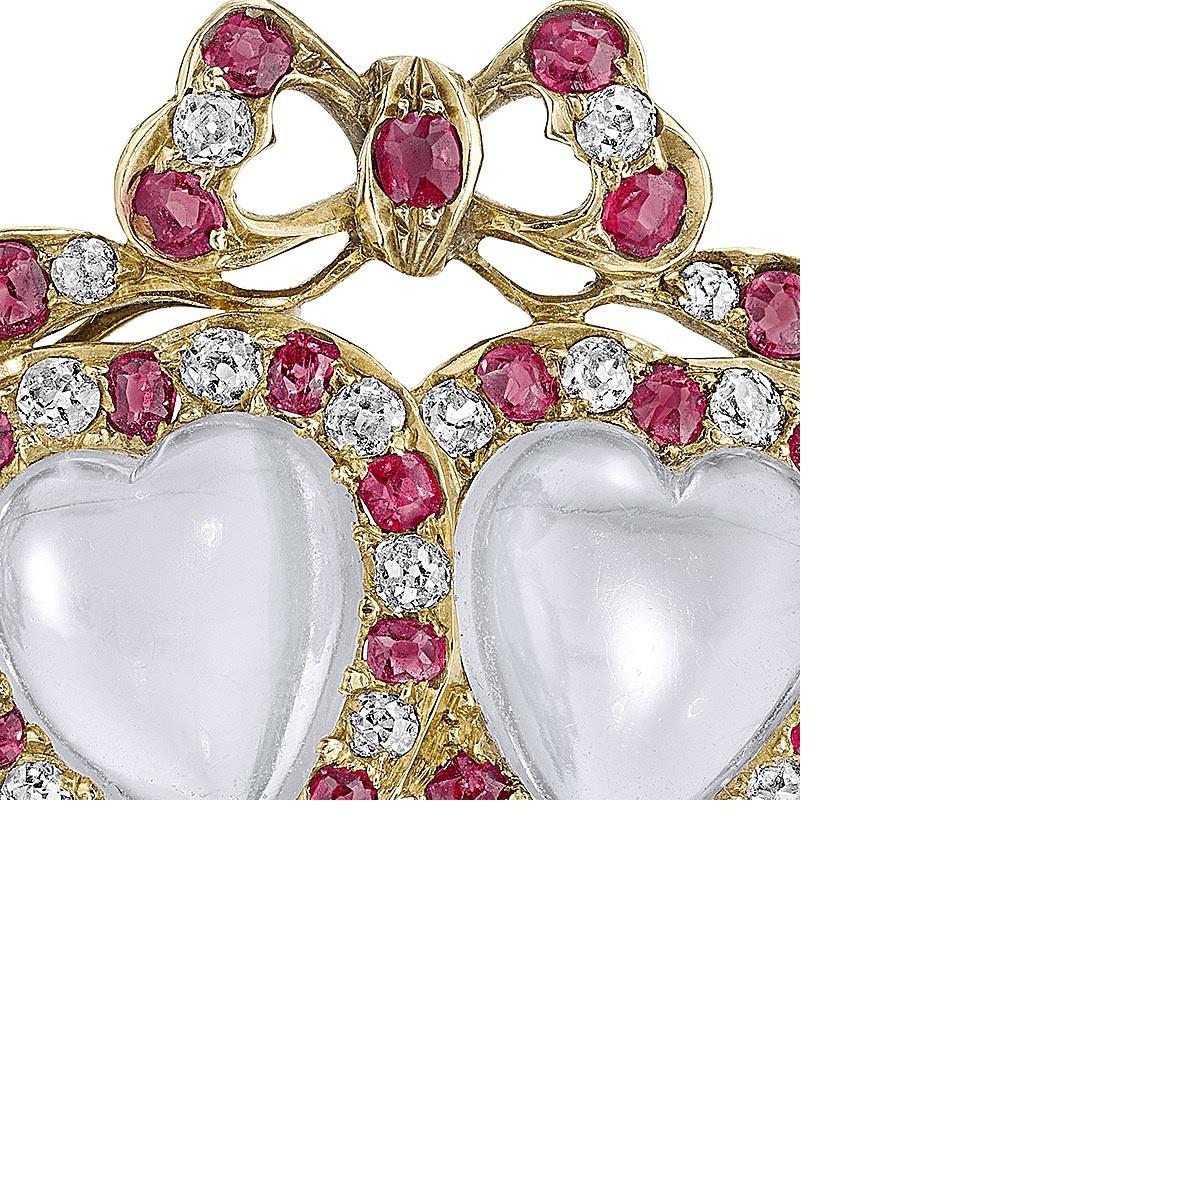 A Victorian 15 karat gold brooch with moonstones, diamonds and rubies. The coupled heart-shaped moonstones are each framed by a bright ring of alternating round-cut diamonds and rubies, and topped with a flowing diamond and ruby ribbon tied in a